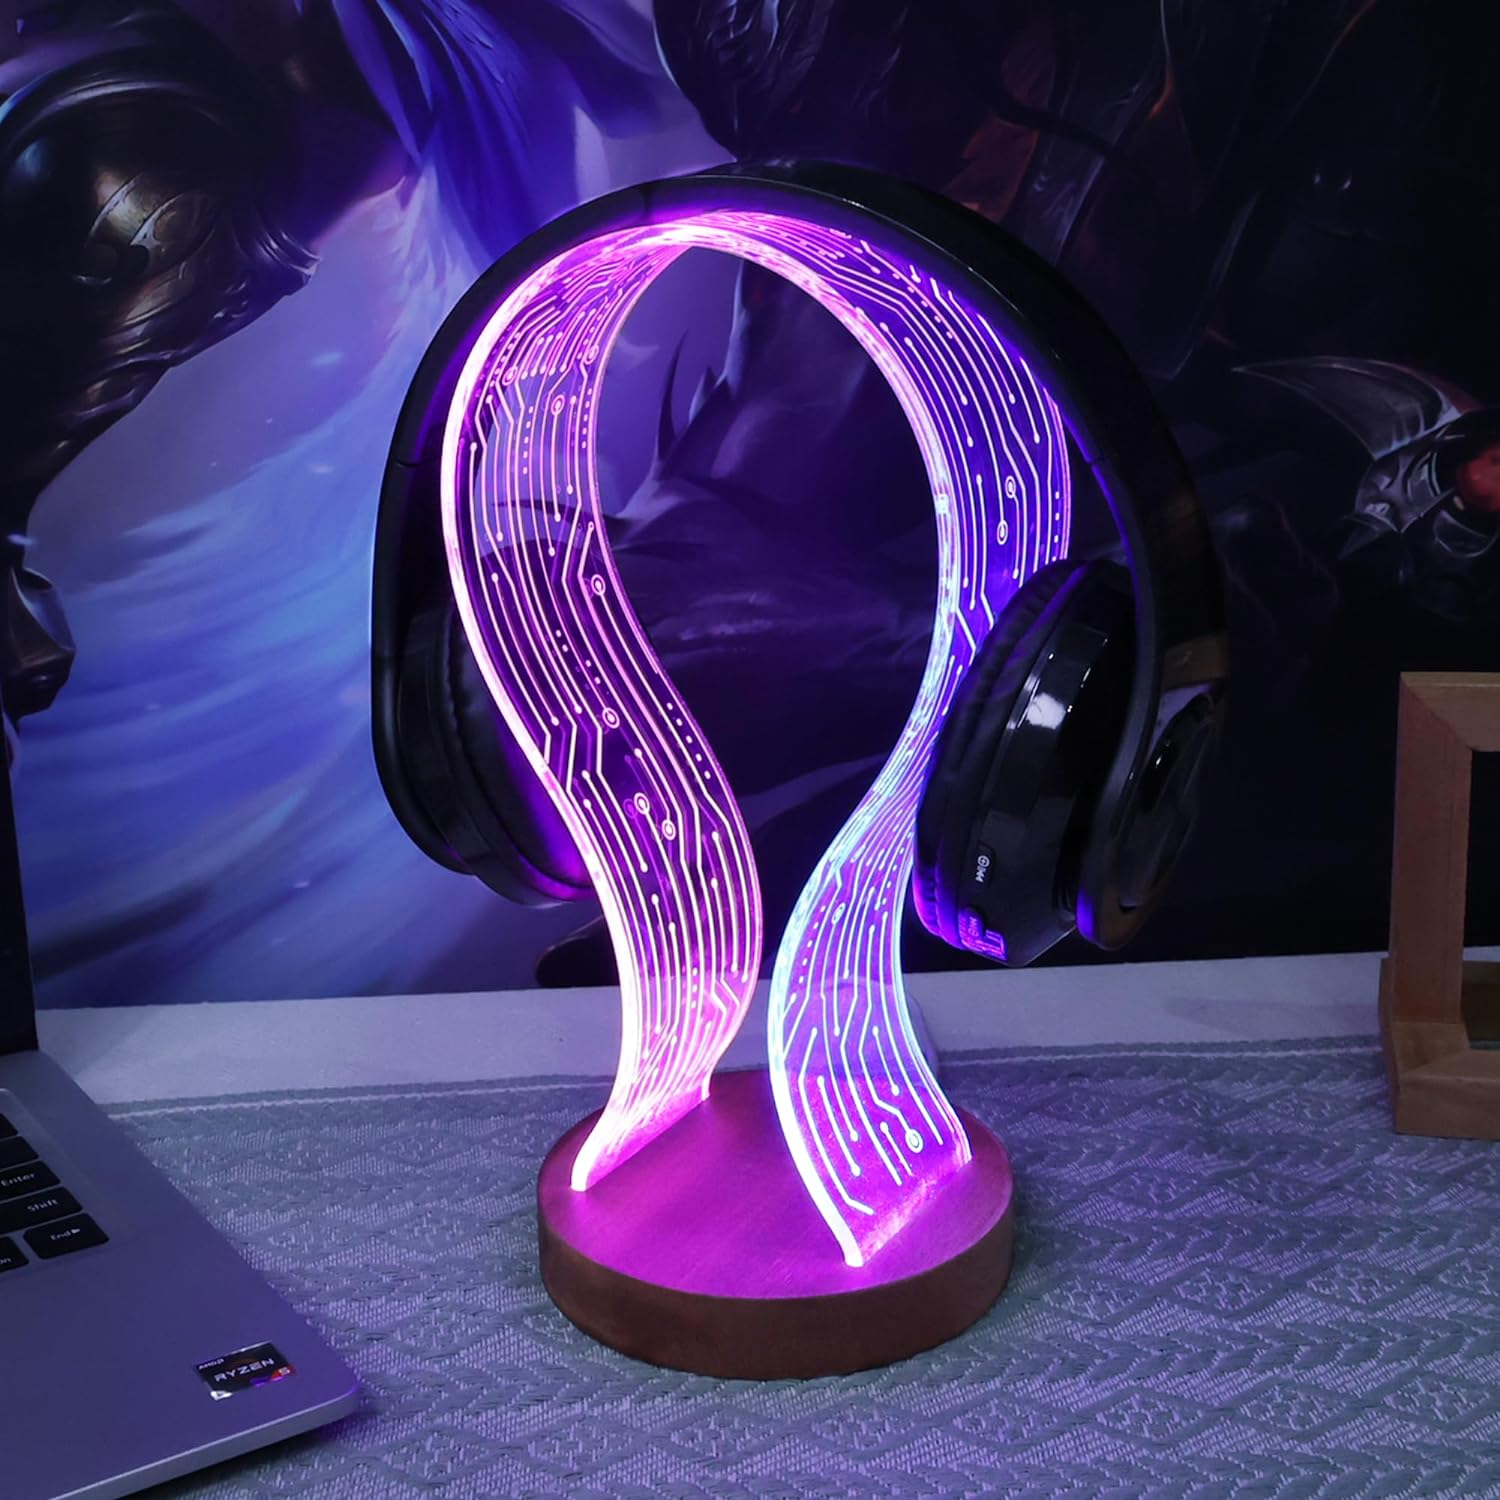 YuanDian Headphone Stand, Wood Headset Holder with Blue Pink LED Night Light for Gamers, Men, and Music Lovers - Ideal Desk Gift Idea